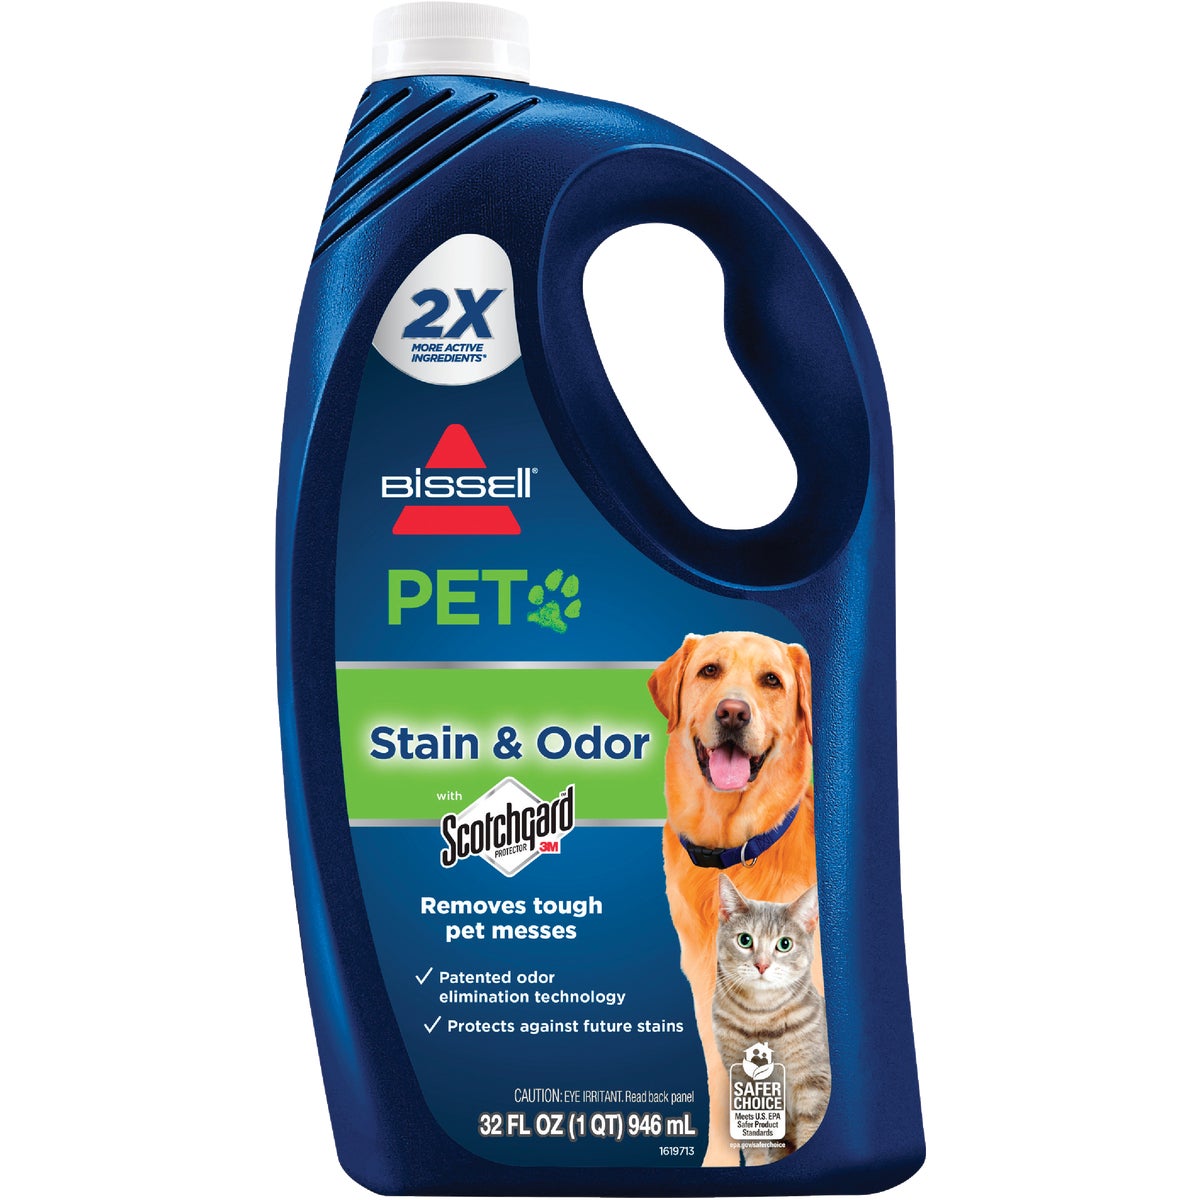 Bissell Pet Stain & Odor Remover Carpet Cleaner with ScotchGard